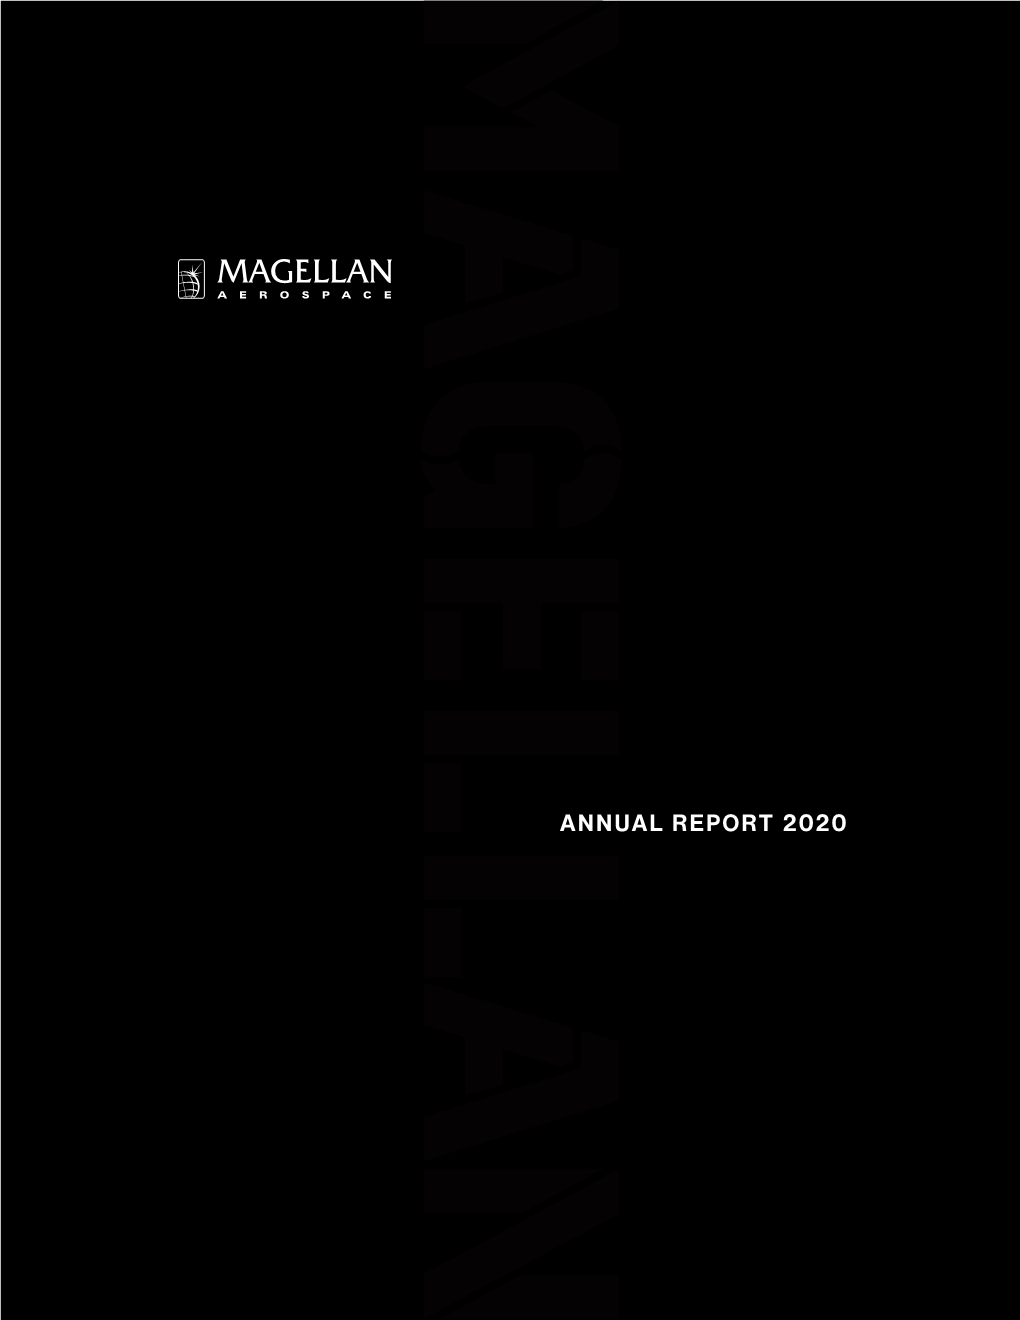 2020 ANNUAL REPORT 1 a Notable Milestone Was Reached in 2020—Magellan Celebrated the Delivery of the 200Th Set of F-35 Lightning II Horizontal Stabilizer Assemblies